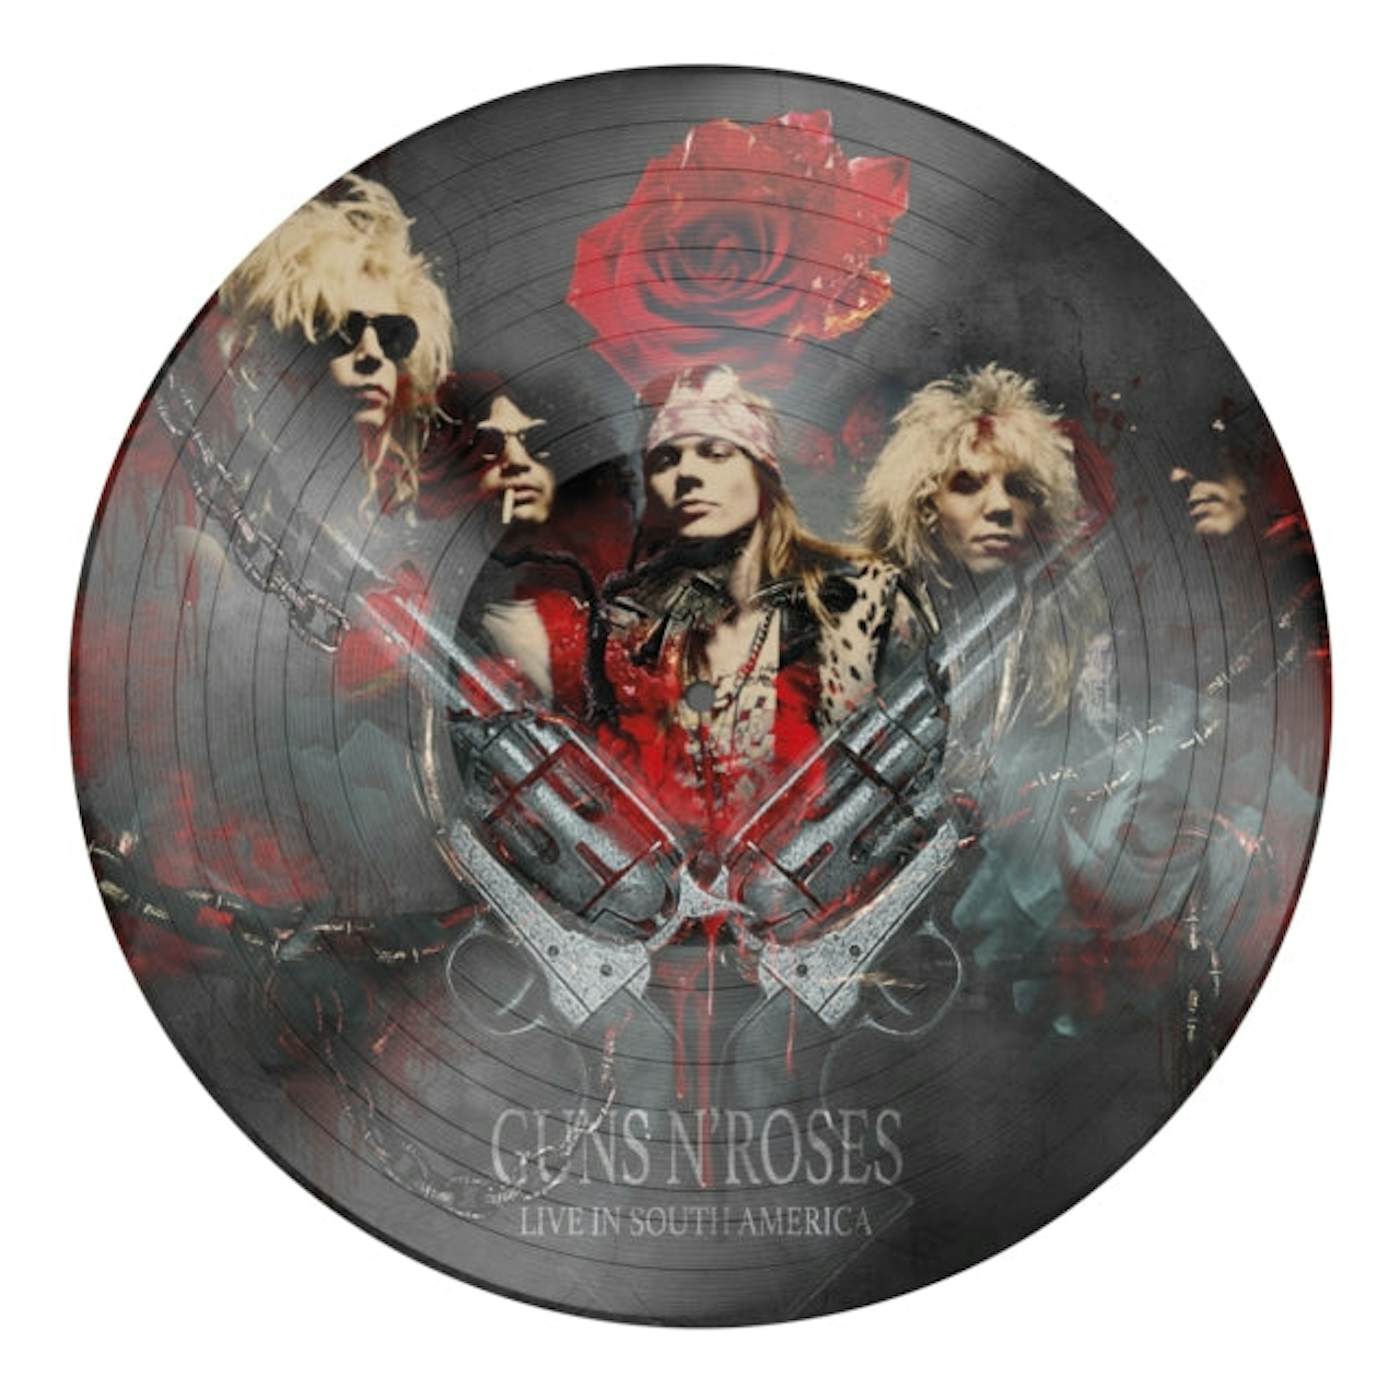 Guns N' Roses LP Vinyl Record - Live In The South America (Picture Disc)